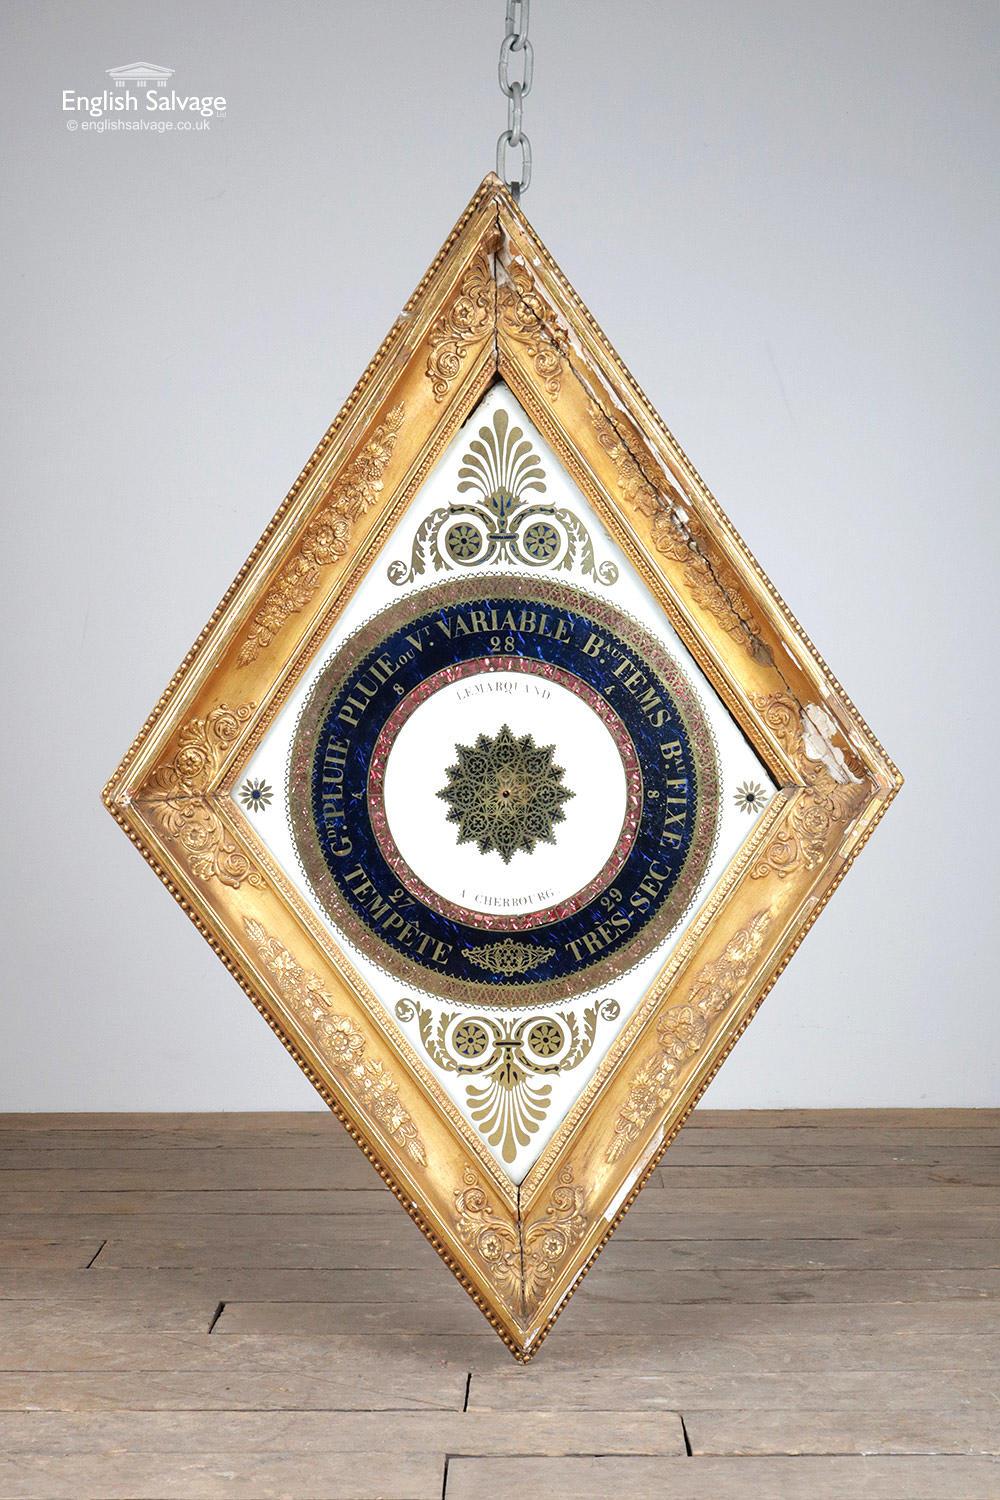 An antique French diamond / lozenge shaped barometer with navy blue weather section, gilt lettering and moulded frame. Some loss to the frame and slight separation. Marked Lemarquand a Cherbourg. Beautiful colors and detail throughout.